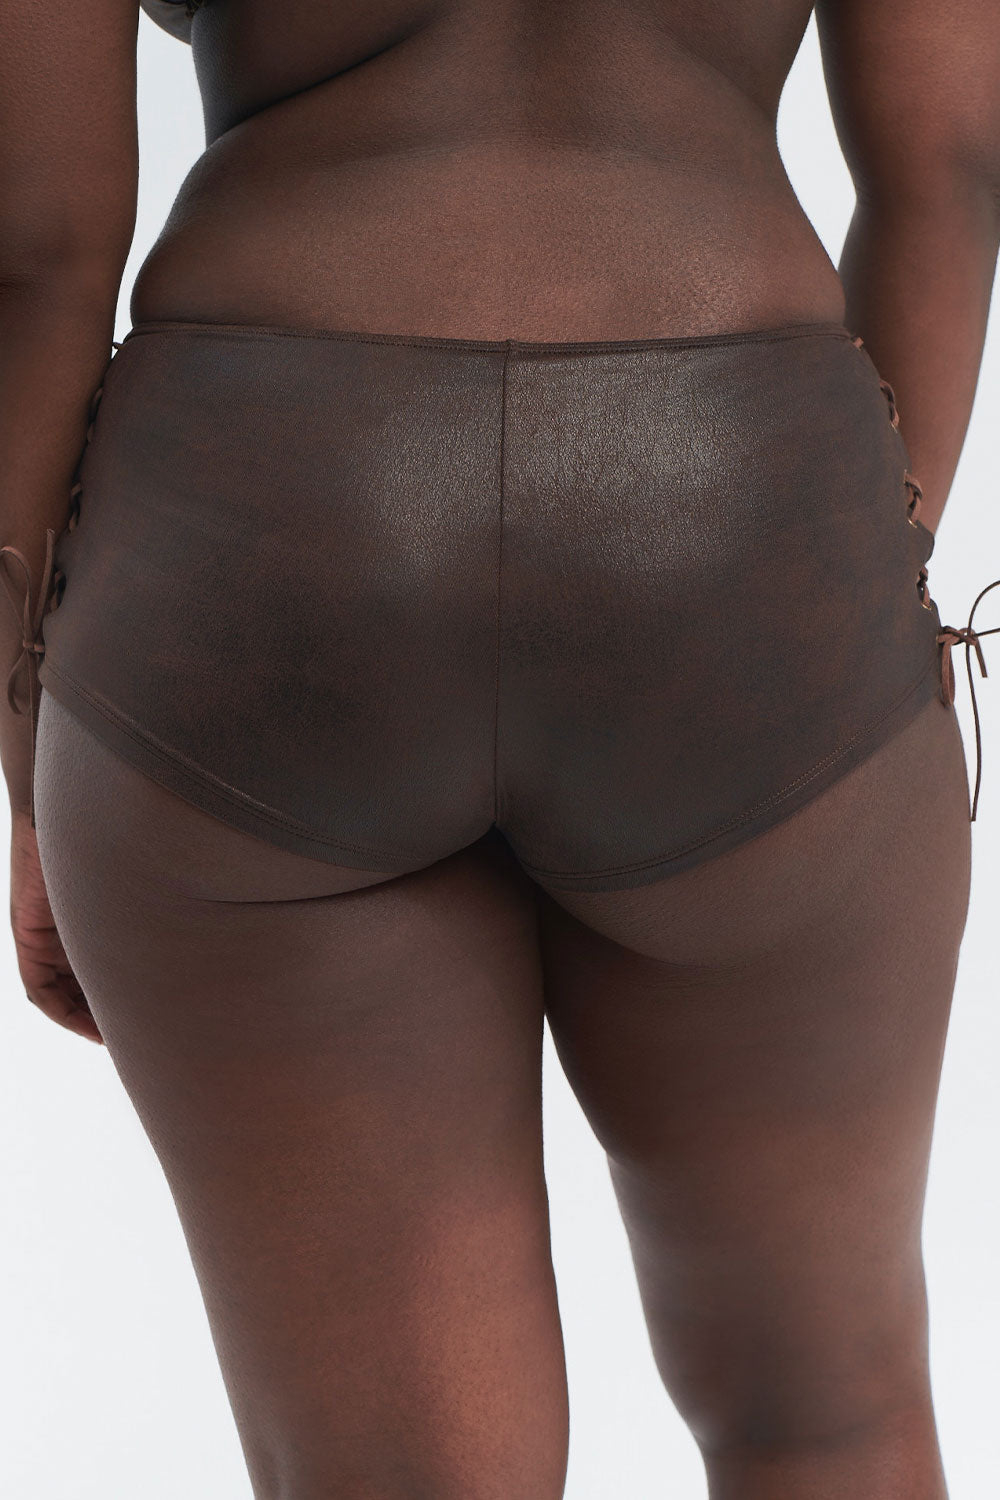 Genevieve Leather Look Full Coverage Boy Short - Cocoa